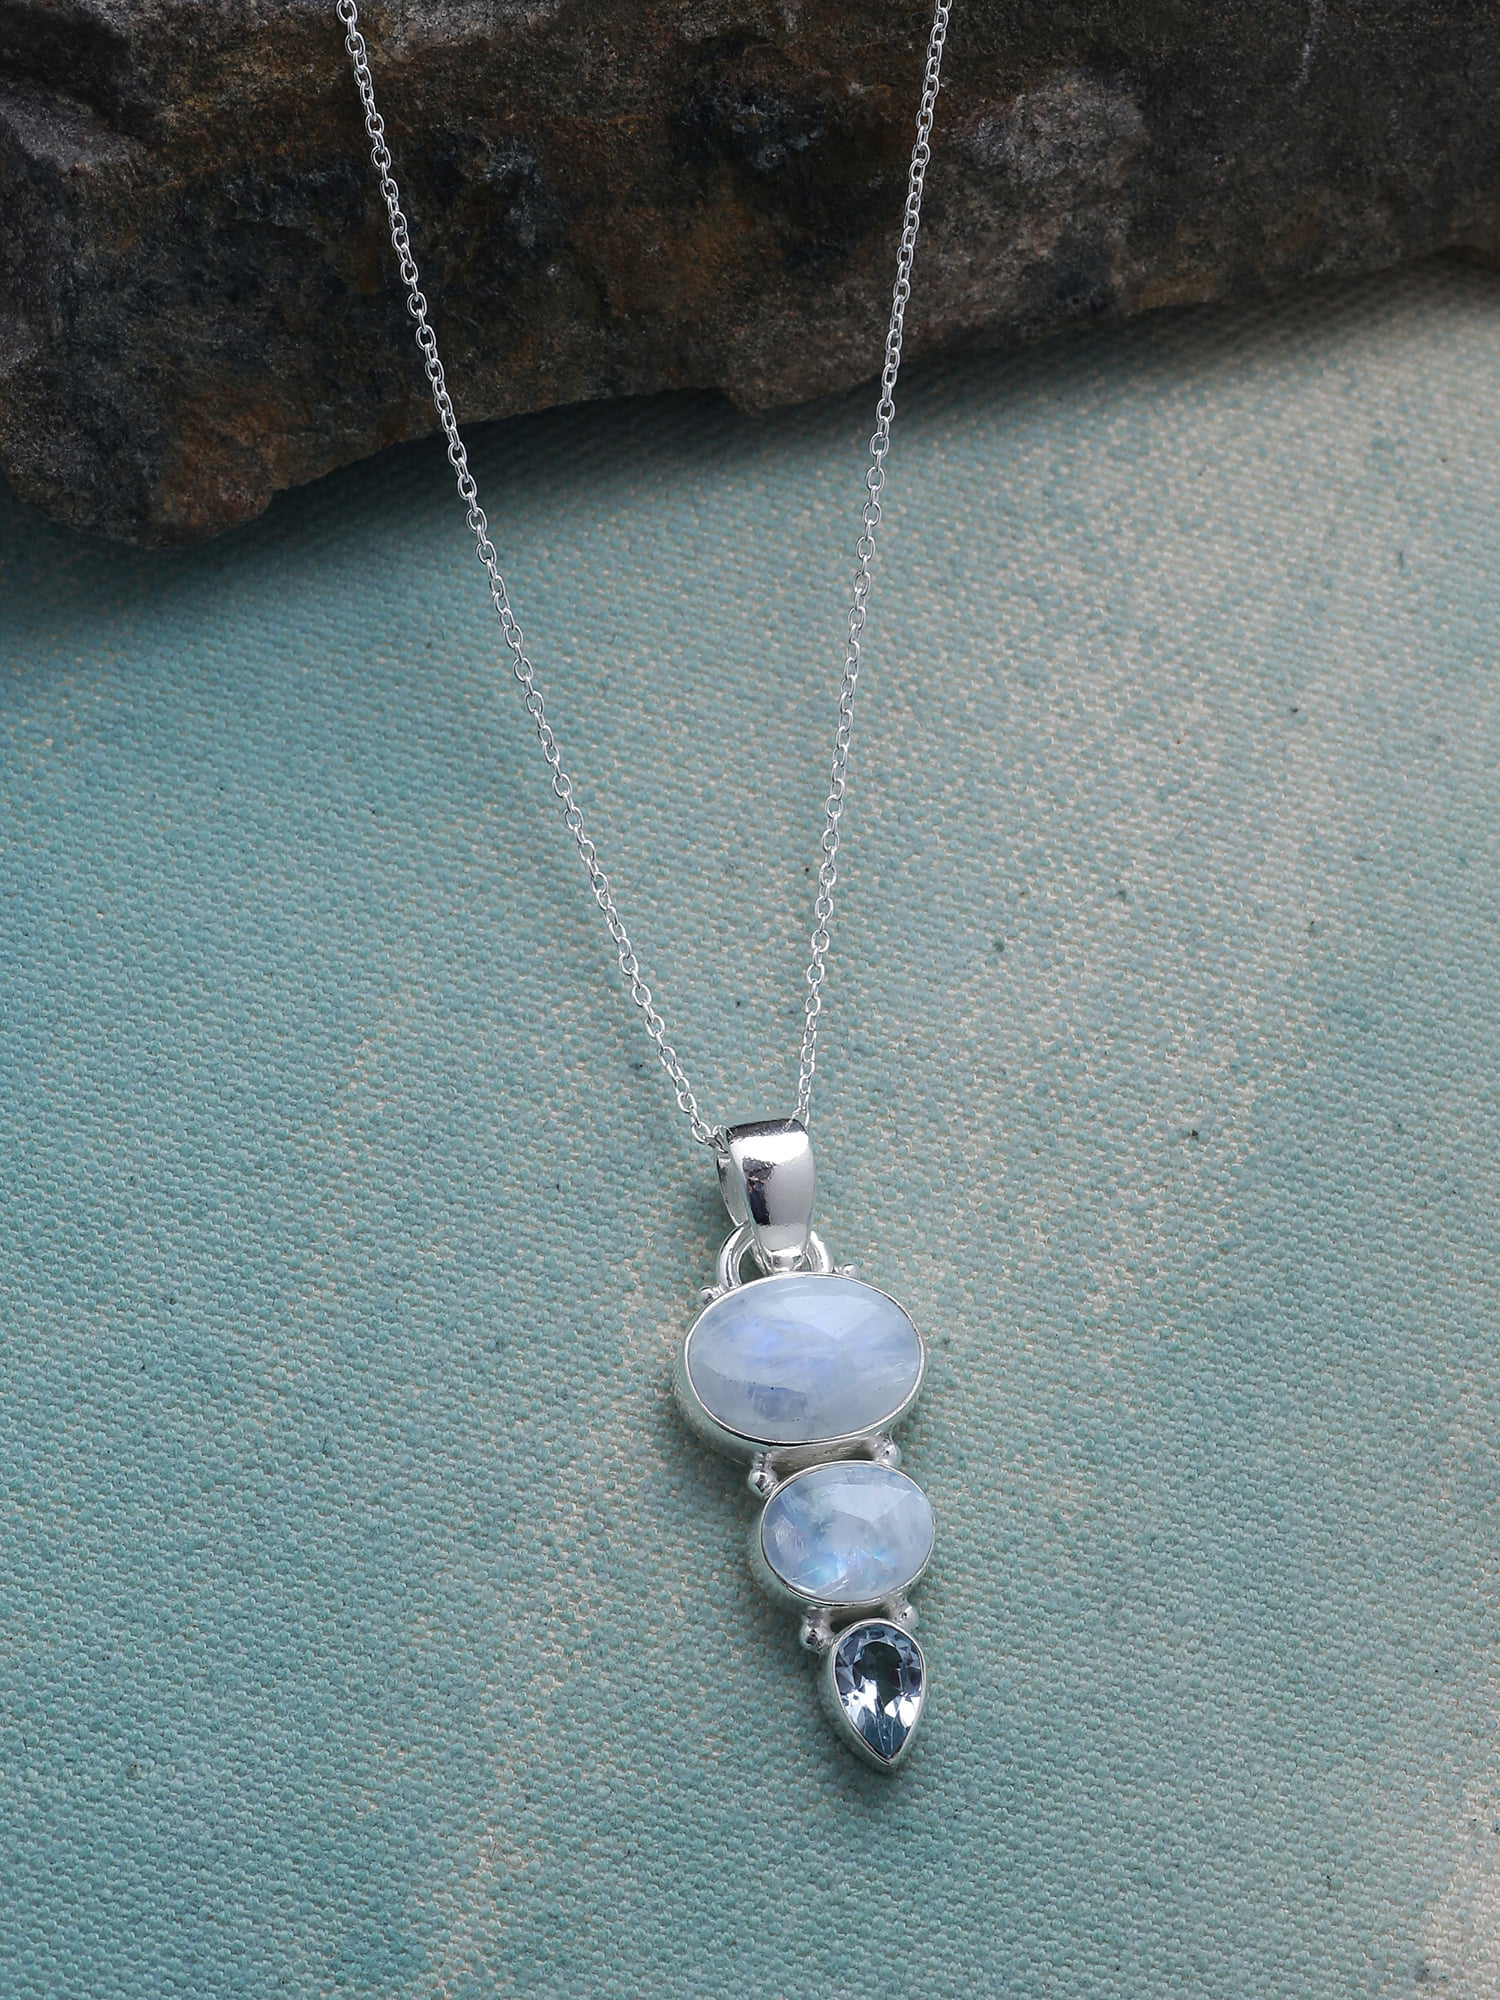 Moonstone Necklace Earrings SET Natural Mystic Solitaire Gemstones in 925 Silver